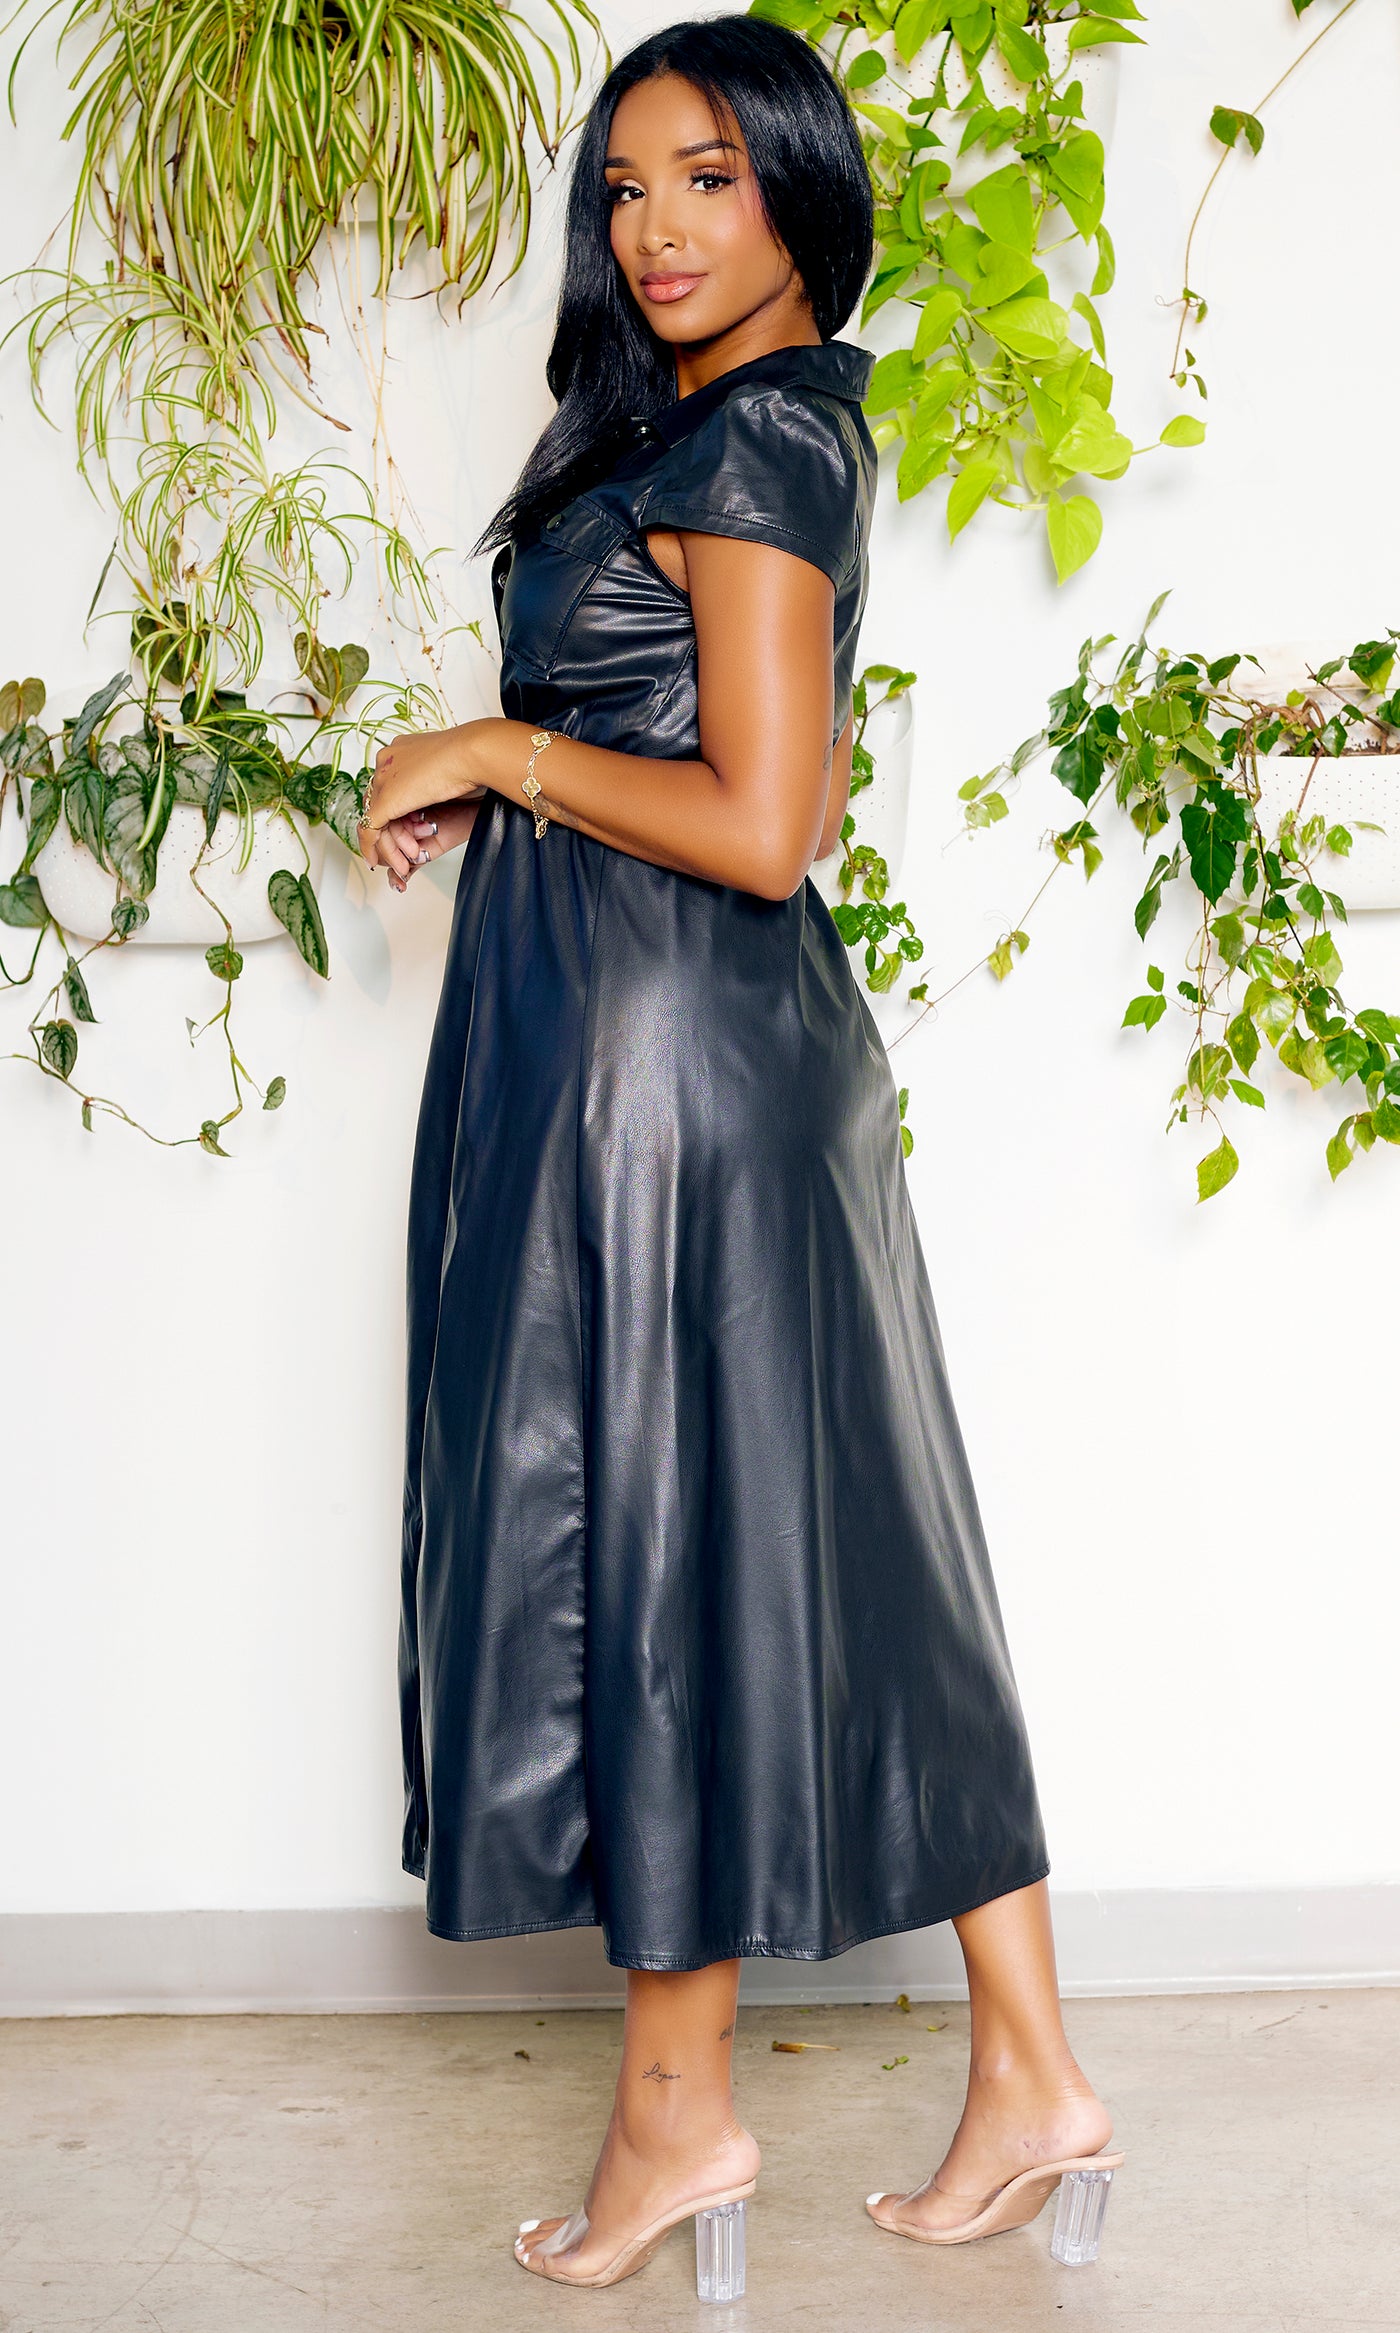 Chic Black Leather Dress - Cutely Covered